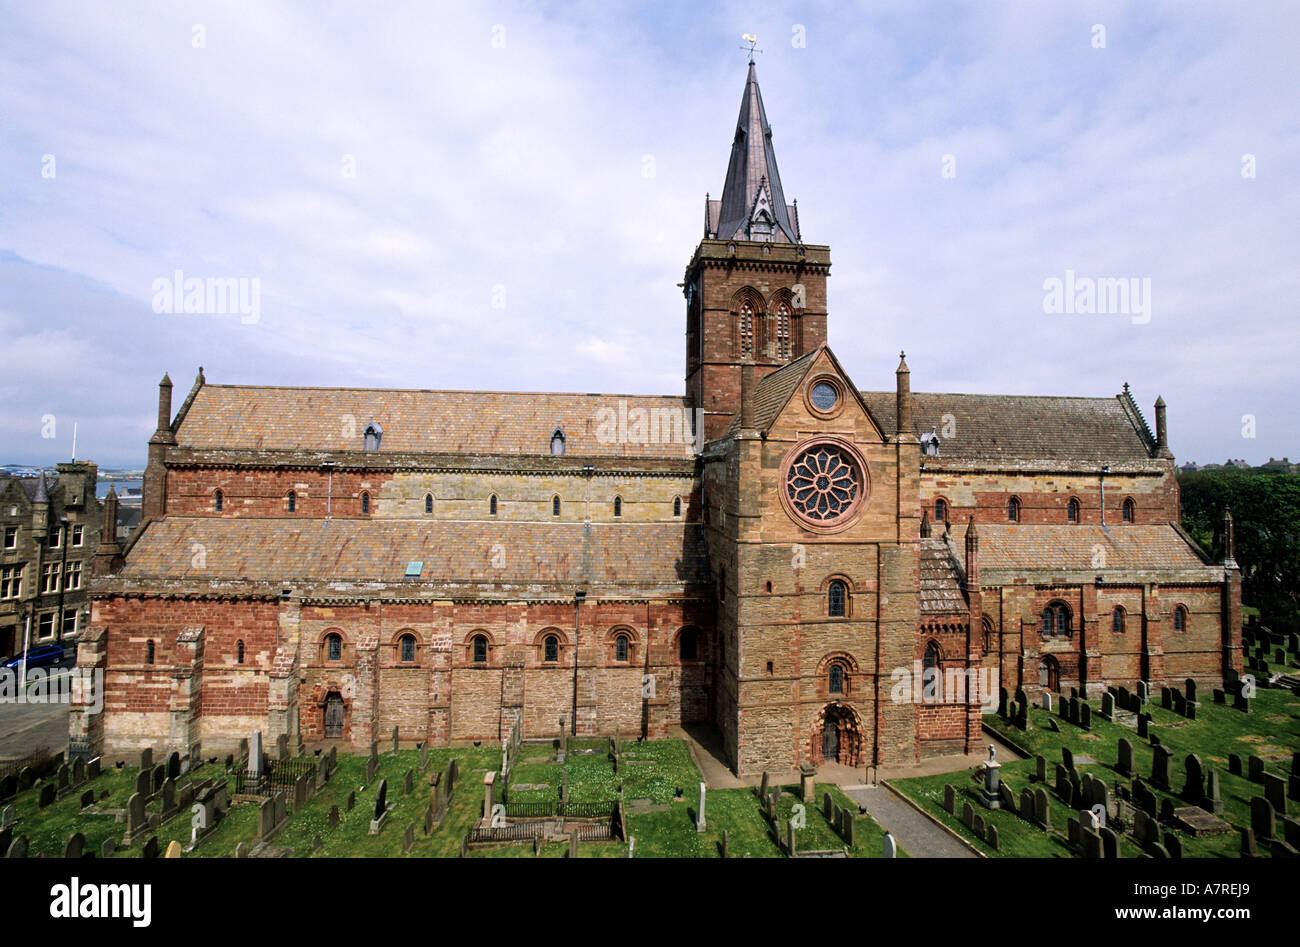 United Kingdom, Scotland, Orkney Islands, Mainland, town of Kirkwall, Saint-Magnus cathedral Stock Photo